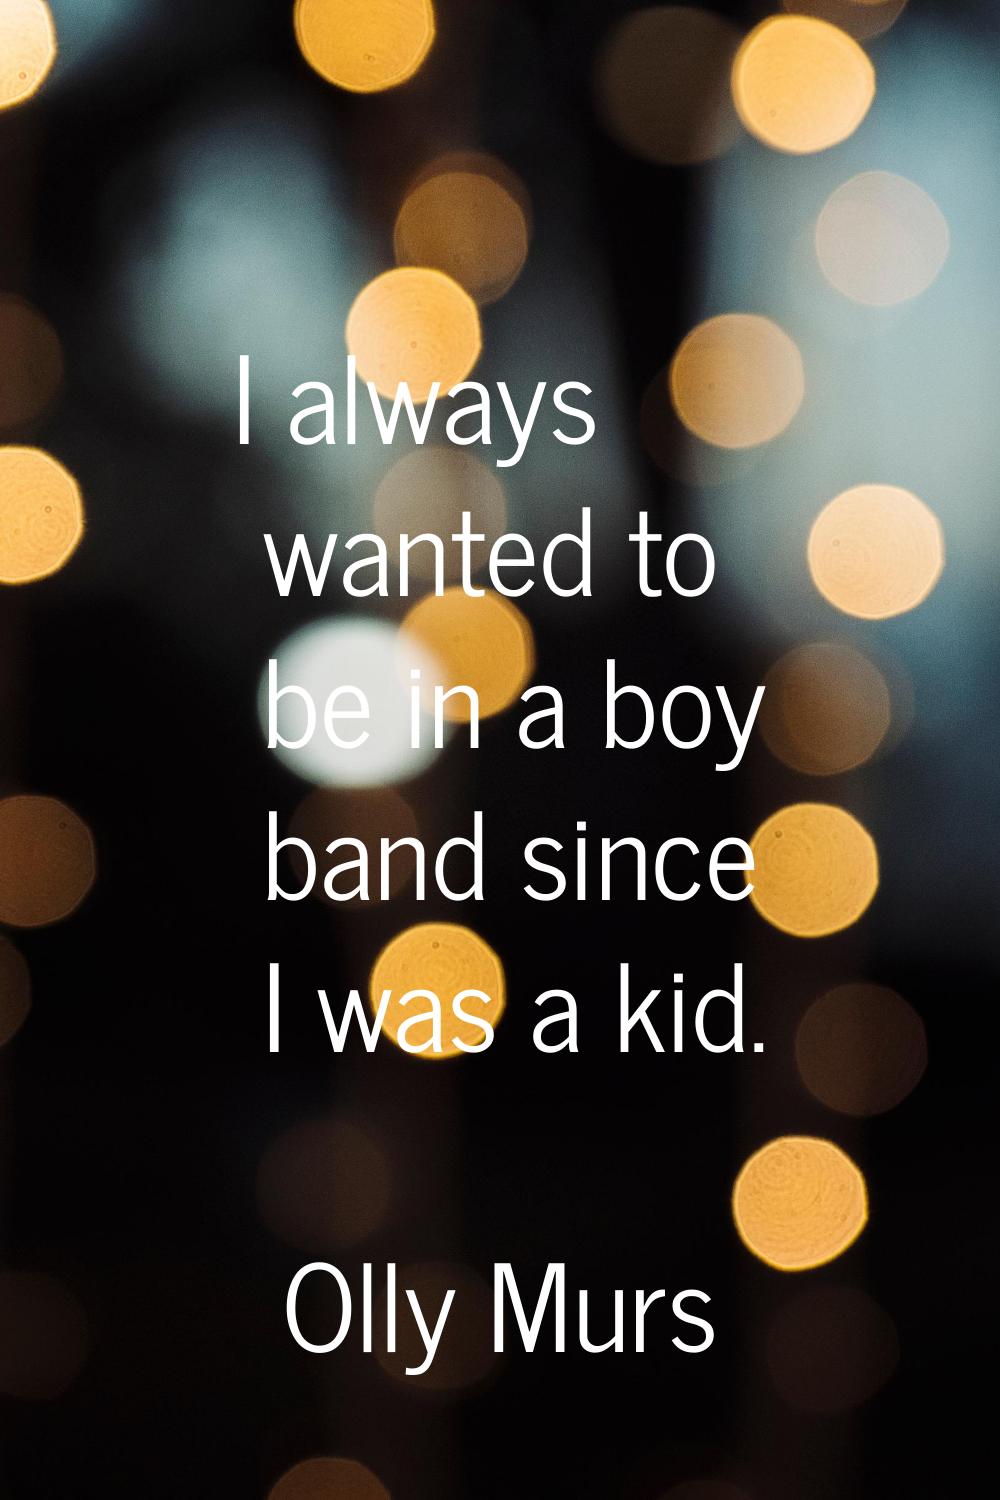 I always wanted to be in a boy band since I was a kid.